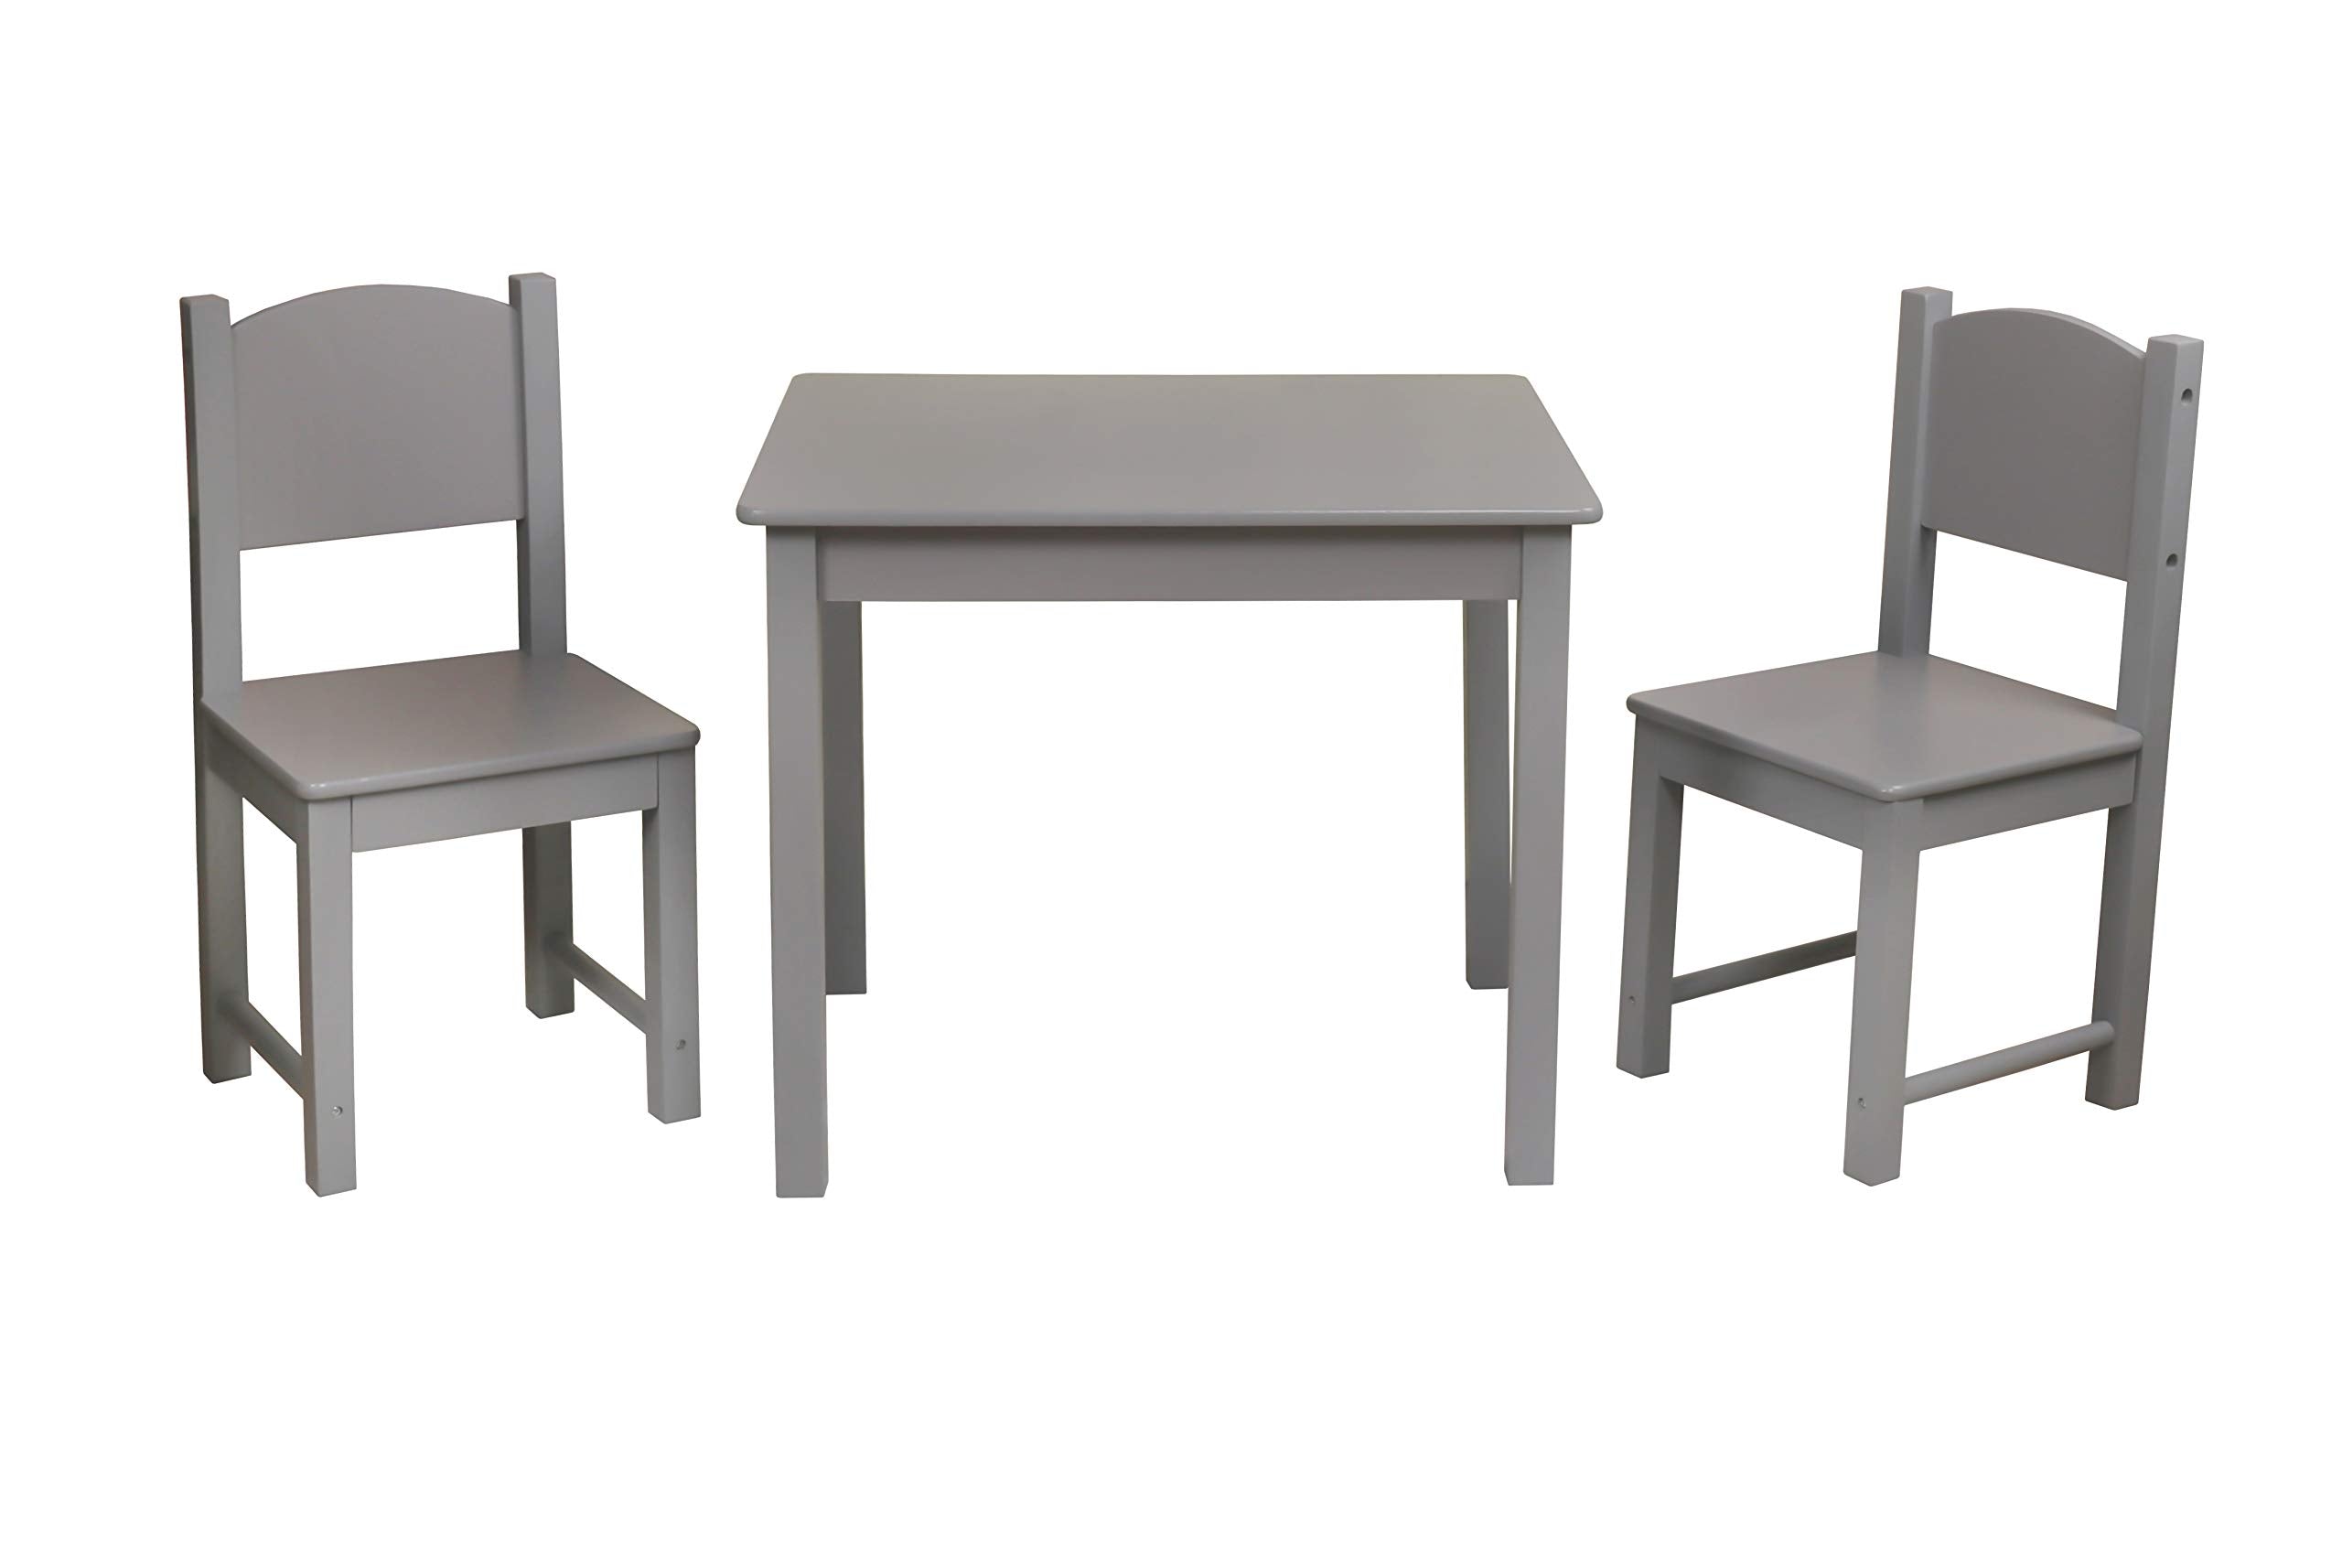 HYGRAD® Multi-Purpose Kids Children's Wooden Table and 2 Chair Set For homeschooling Preschoolers Boys and Girls Activity Build & Play Table Chair Set (Grey Table & Chair)